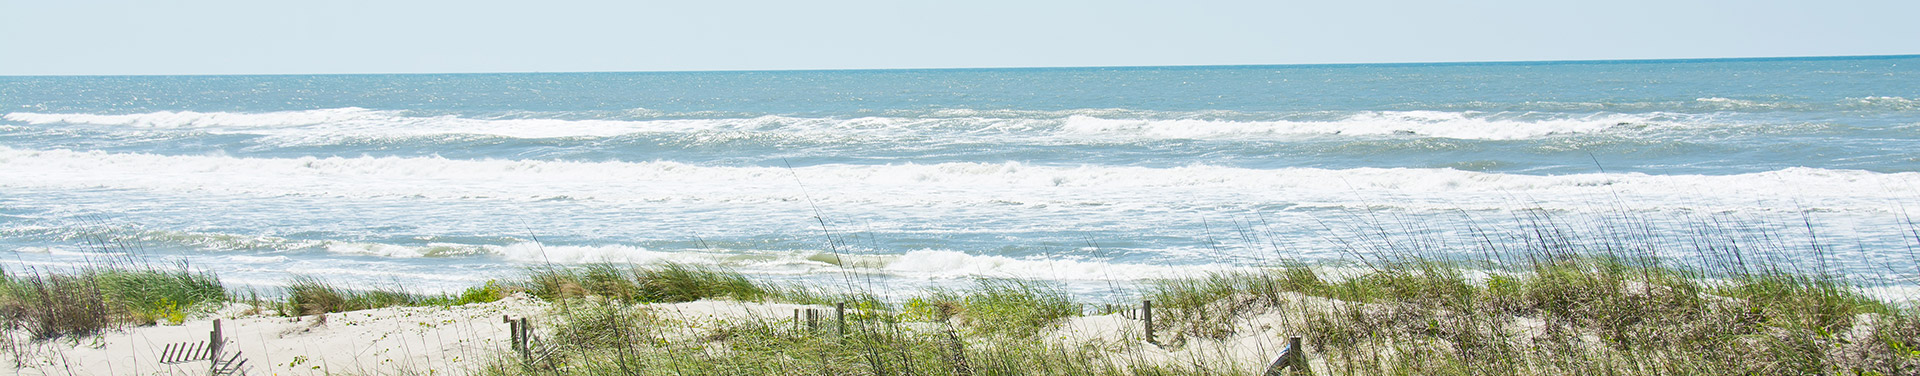 The beaches of Pine Knoll Shores